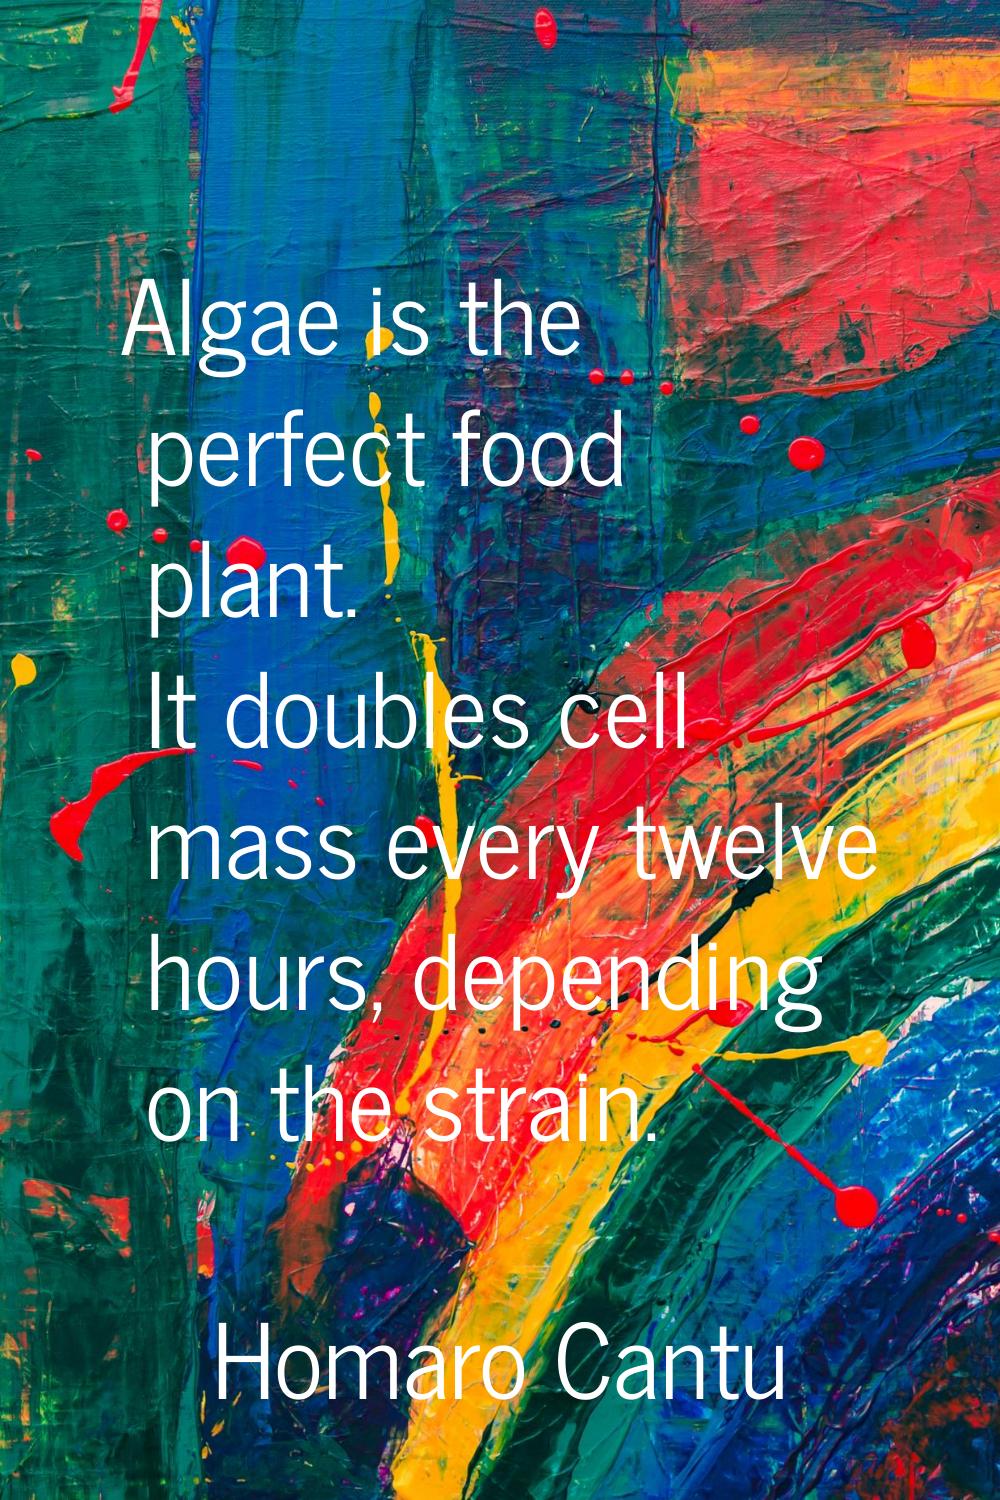 Algae is the perfect food plant. It doubles cell mass every twelve hours, depending on the strain.